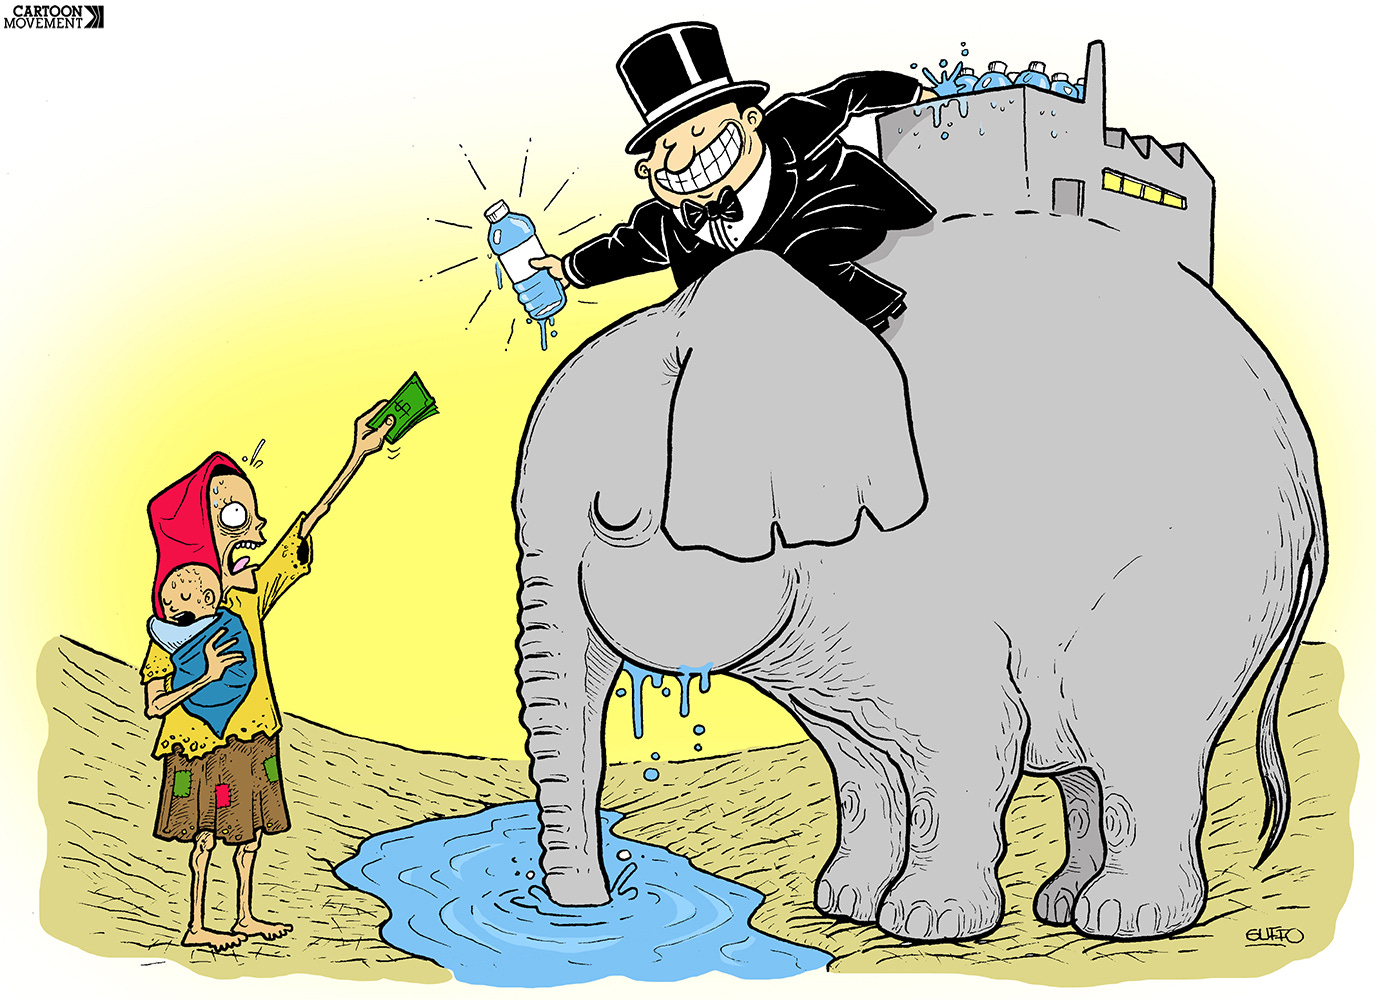 Cartoon showing an elephant with a water bottling factory on its back. An industrialist is handing a bottle of water to a poor looking woman in exchange for money, while the elephant is sucking in massive amounts of water through its trunk from a stream.